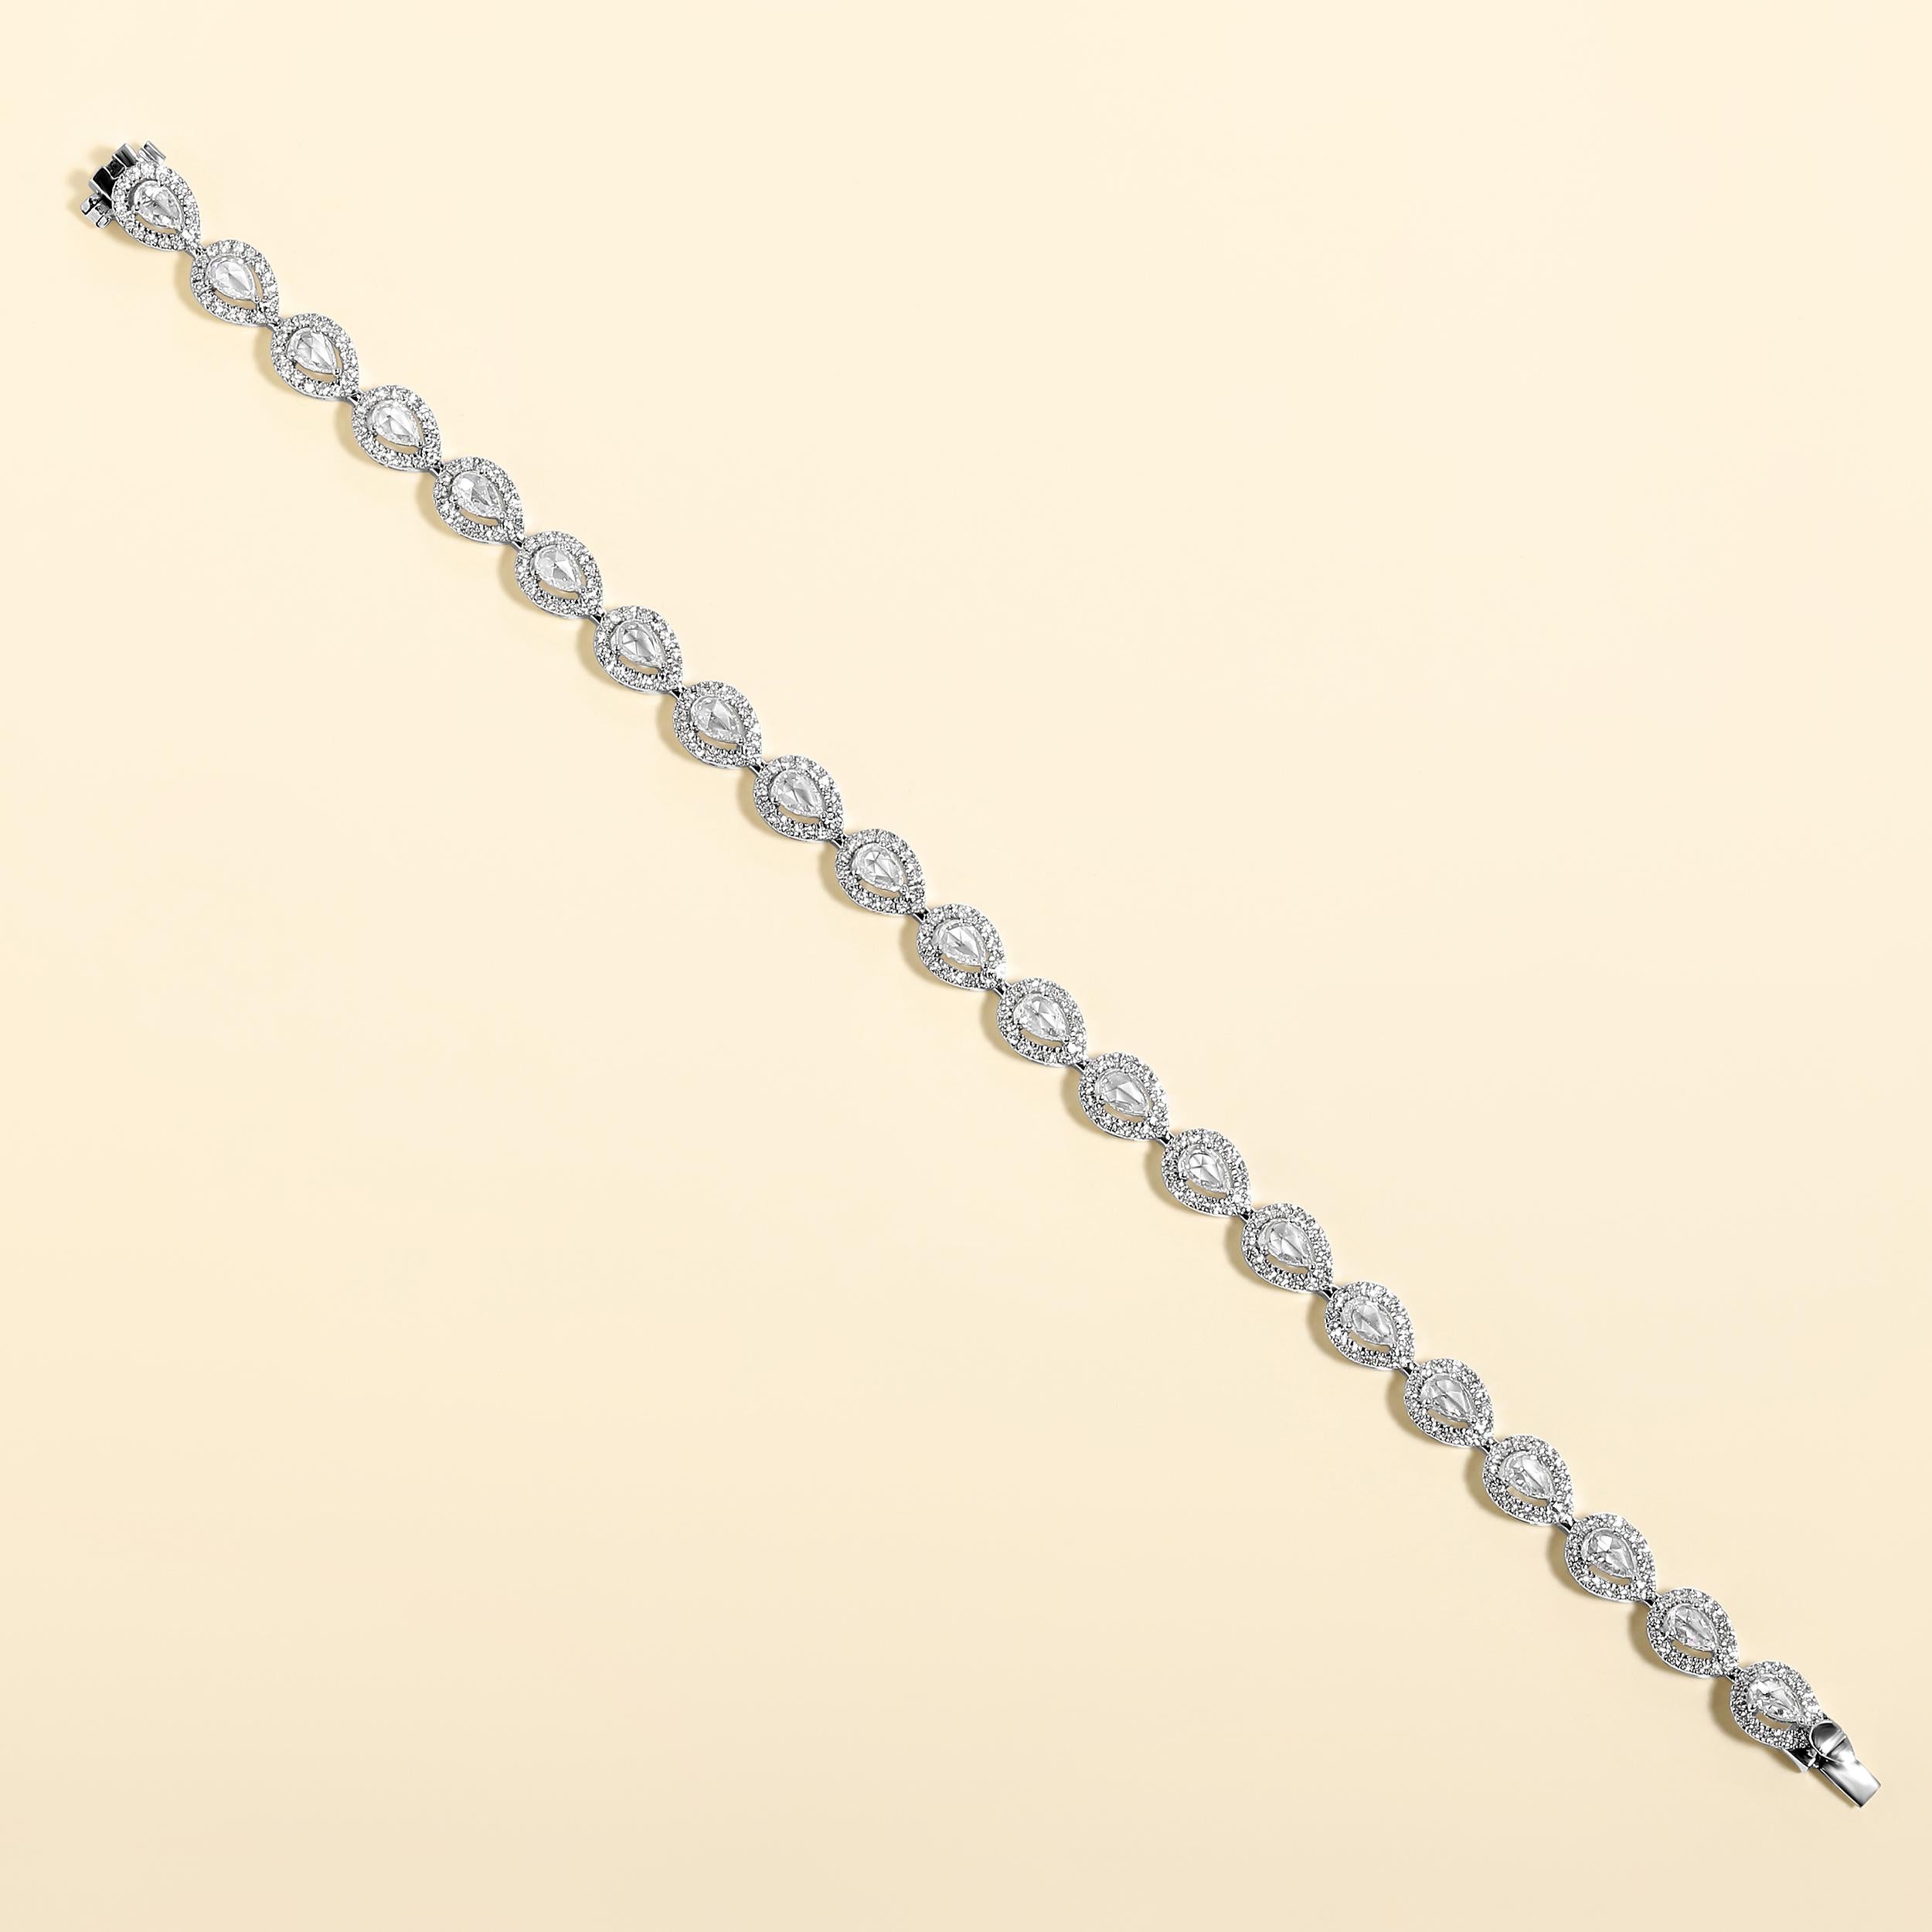 Crafted in 12.87 grams of 14K White Gold, the bracelet contains 357 stones of Round Natural Diamonds with a total of 1.48 carat in F-G color and VVS-VS clarity combined with 21 stones of Pear-Shaped Rose-Cut Natural Diamonds with a total of 1.73